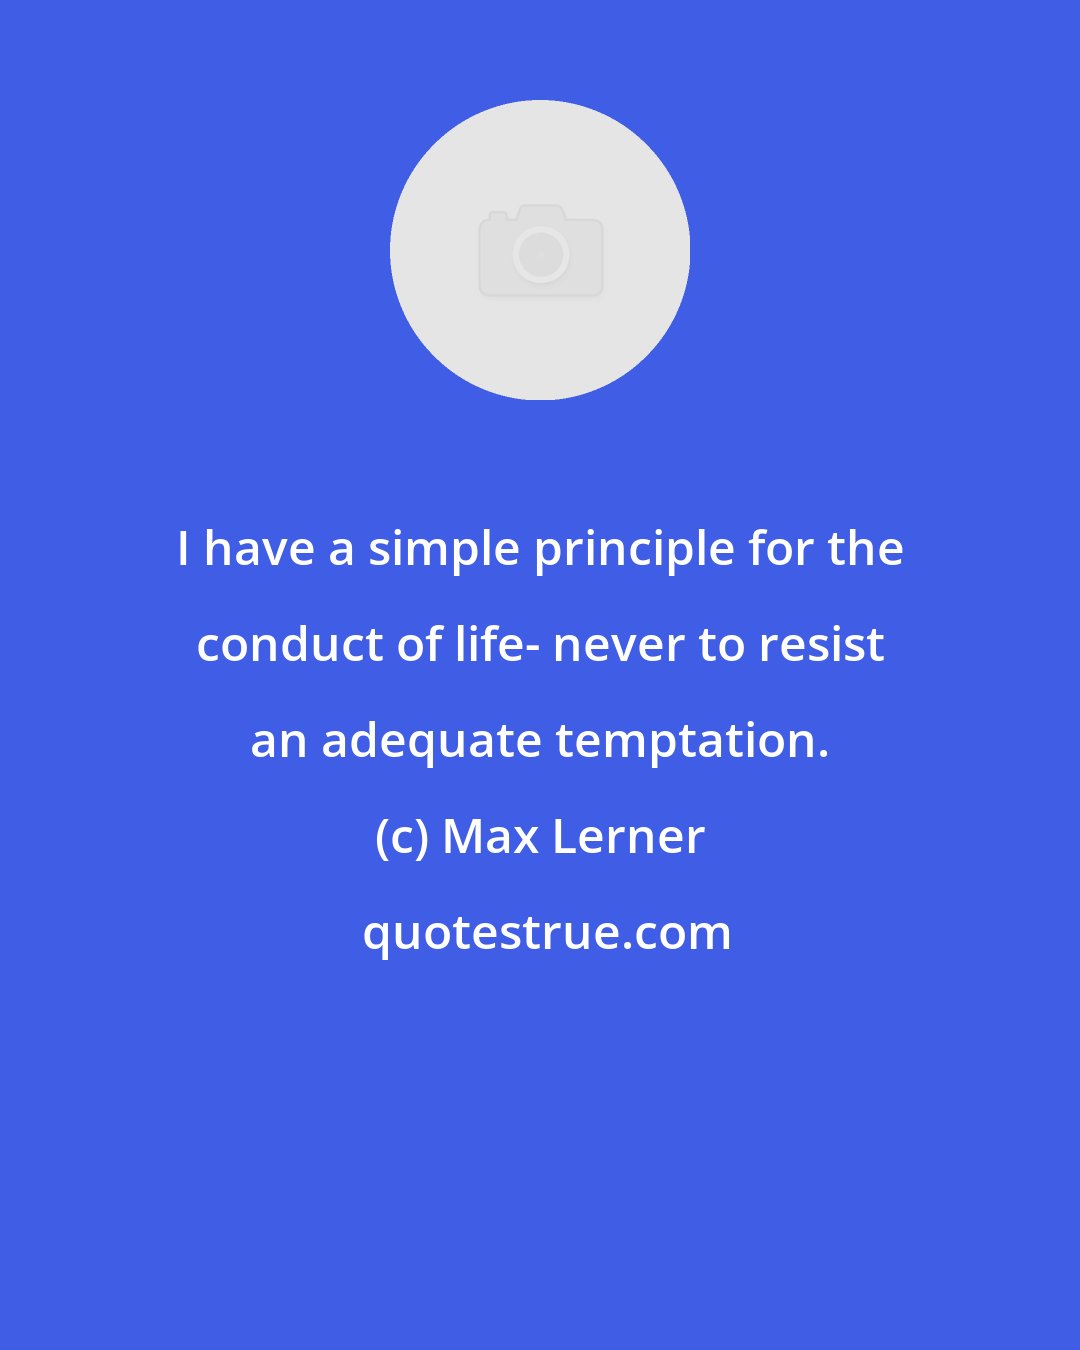 Max Lerner: I have a simple principle for the conduct of life- never to resist an adequate temptation.